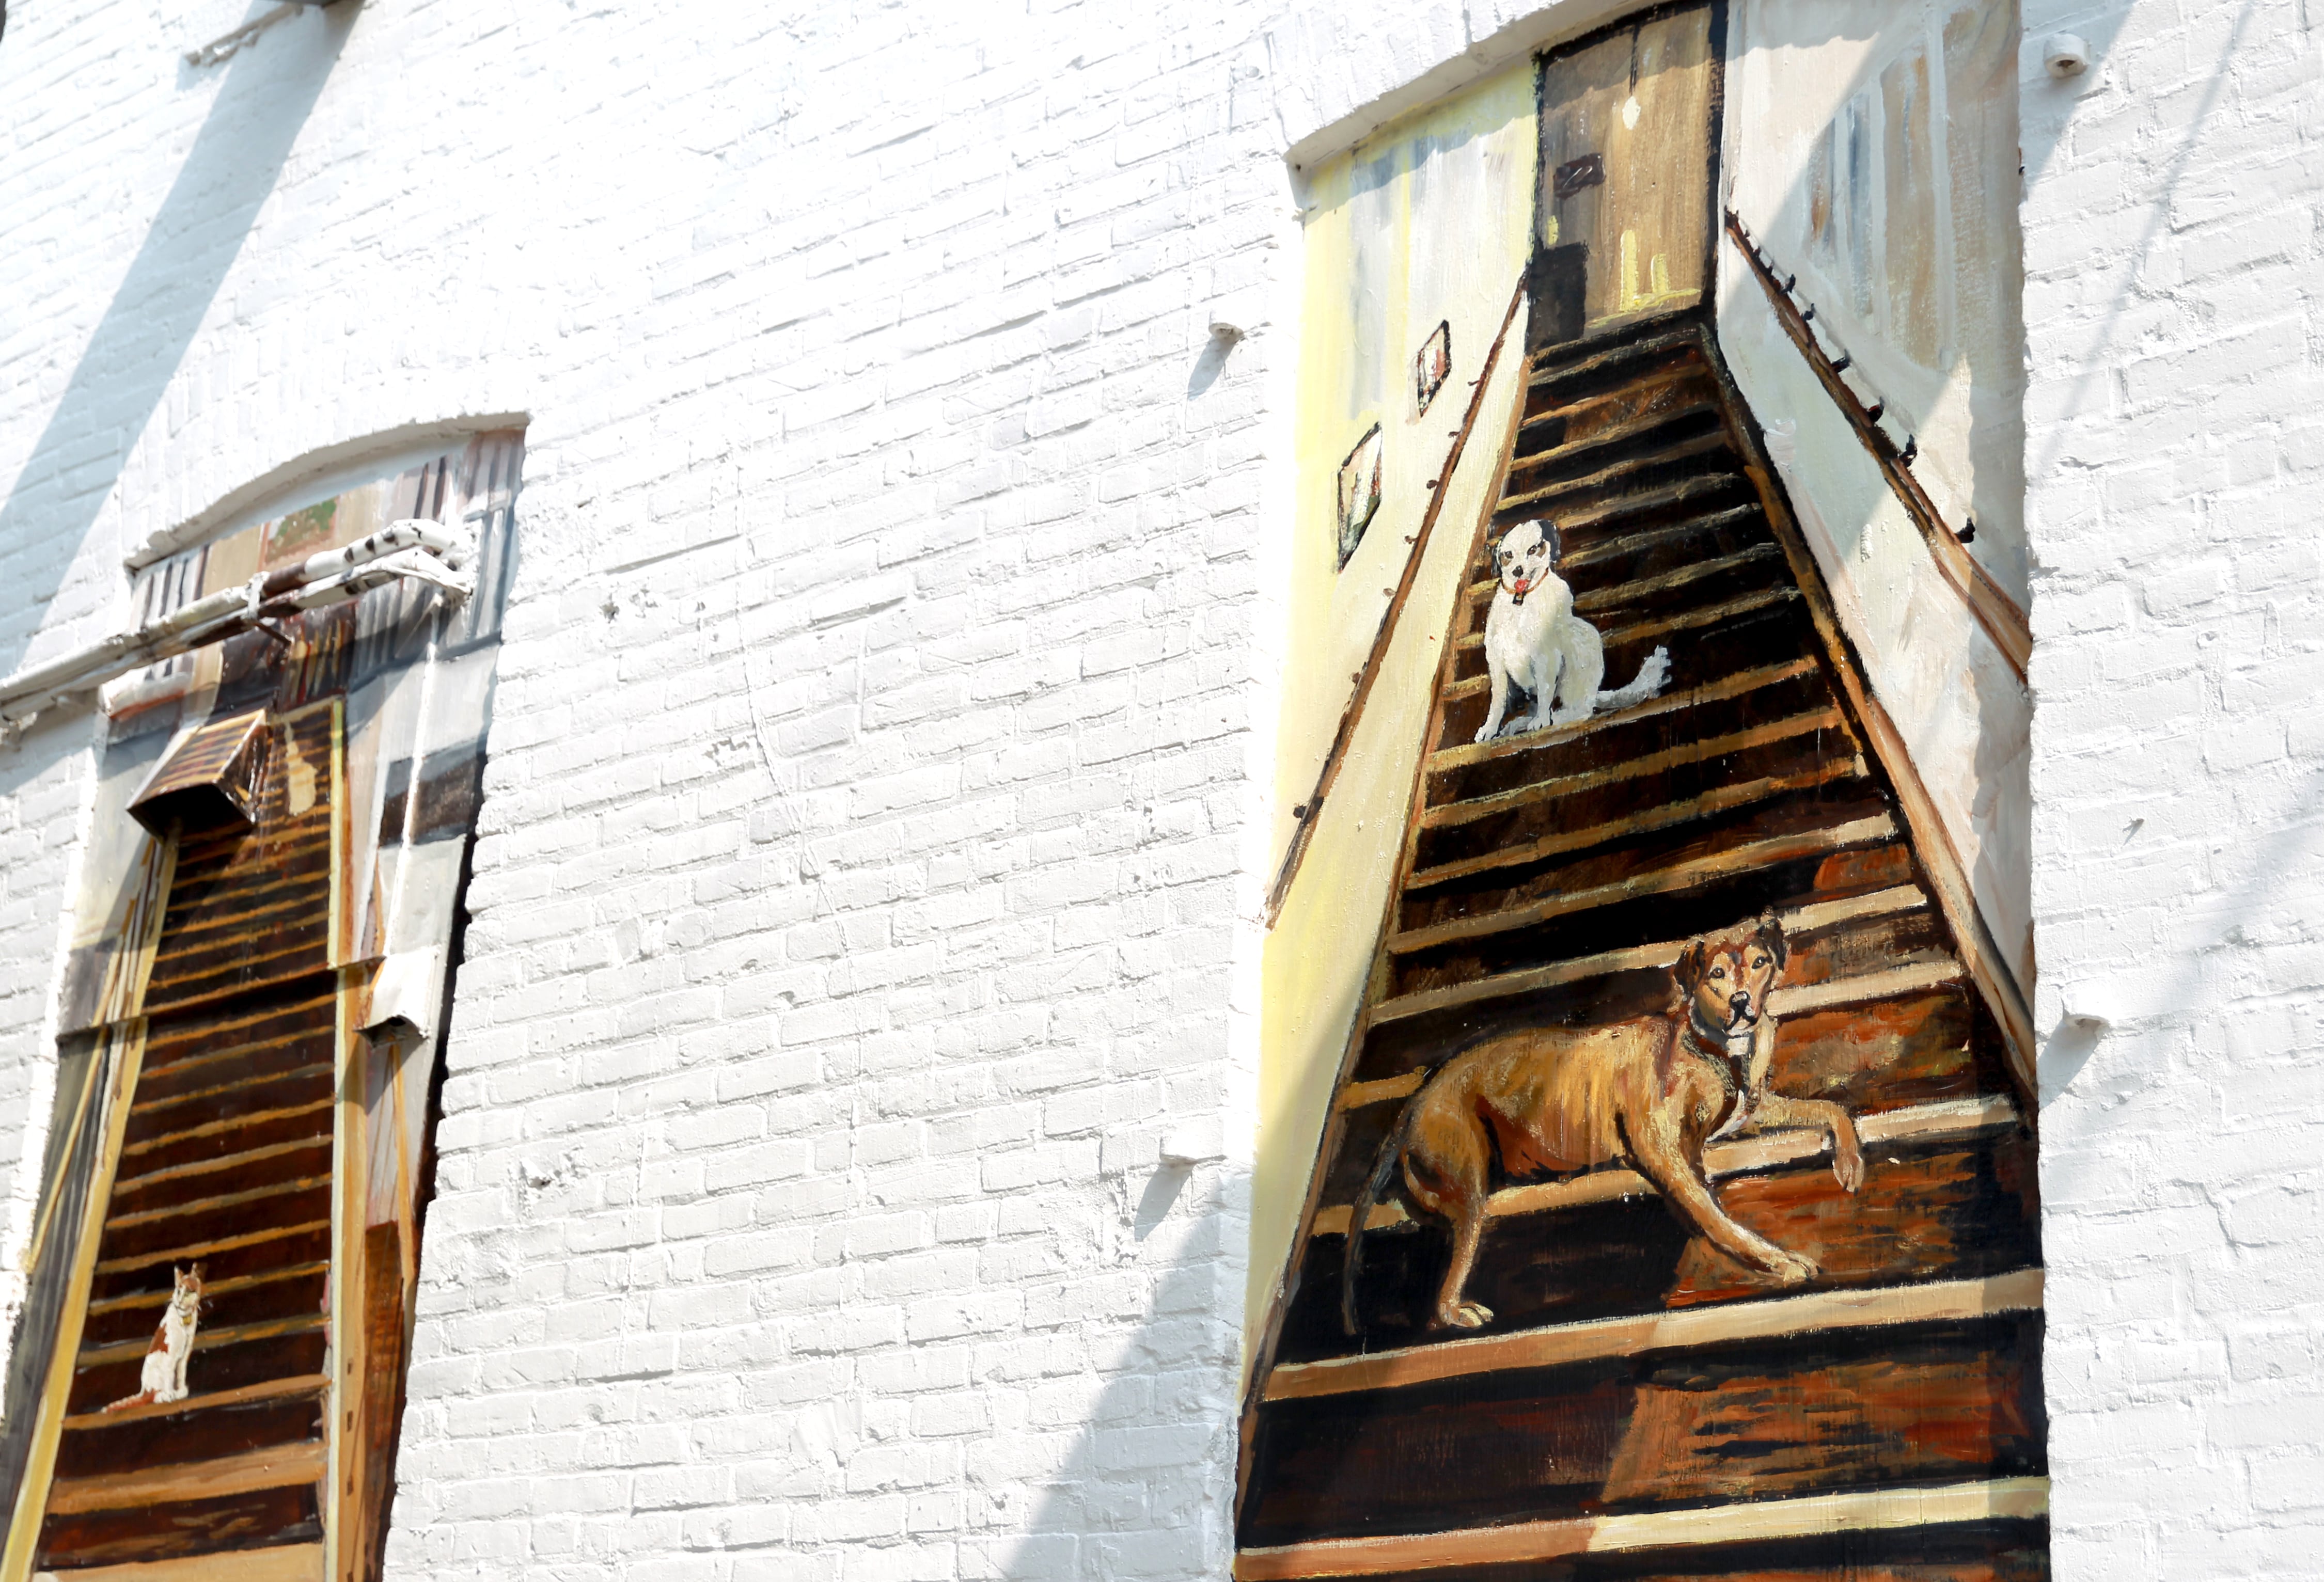 Artist Chris Cudworth used his two rescue dogs, Lucy and Crash, as models for a mural he painted on the backside of the Fox.Build Makerspace building in downtown St. Charles.